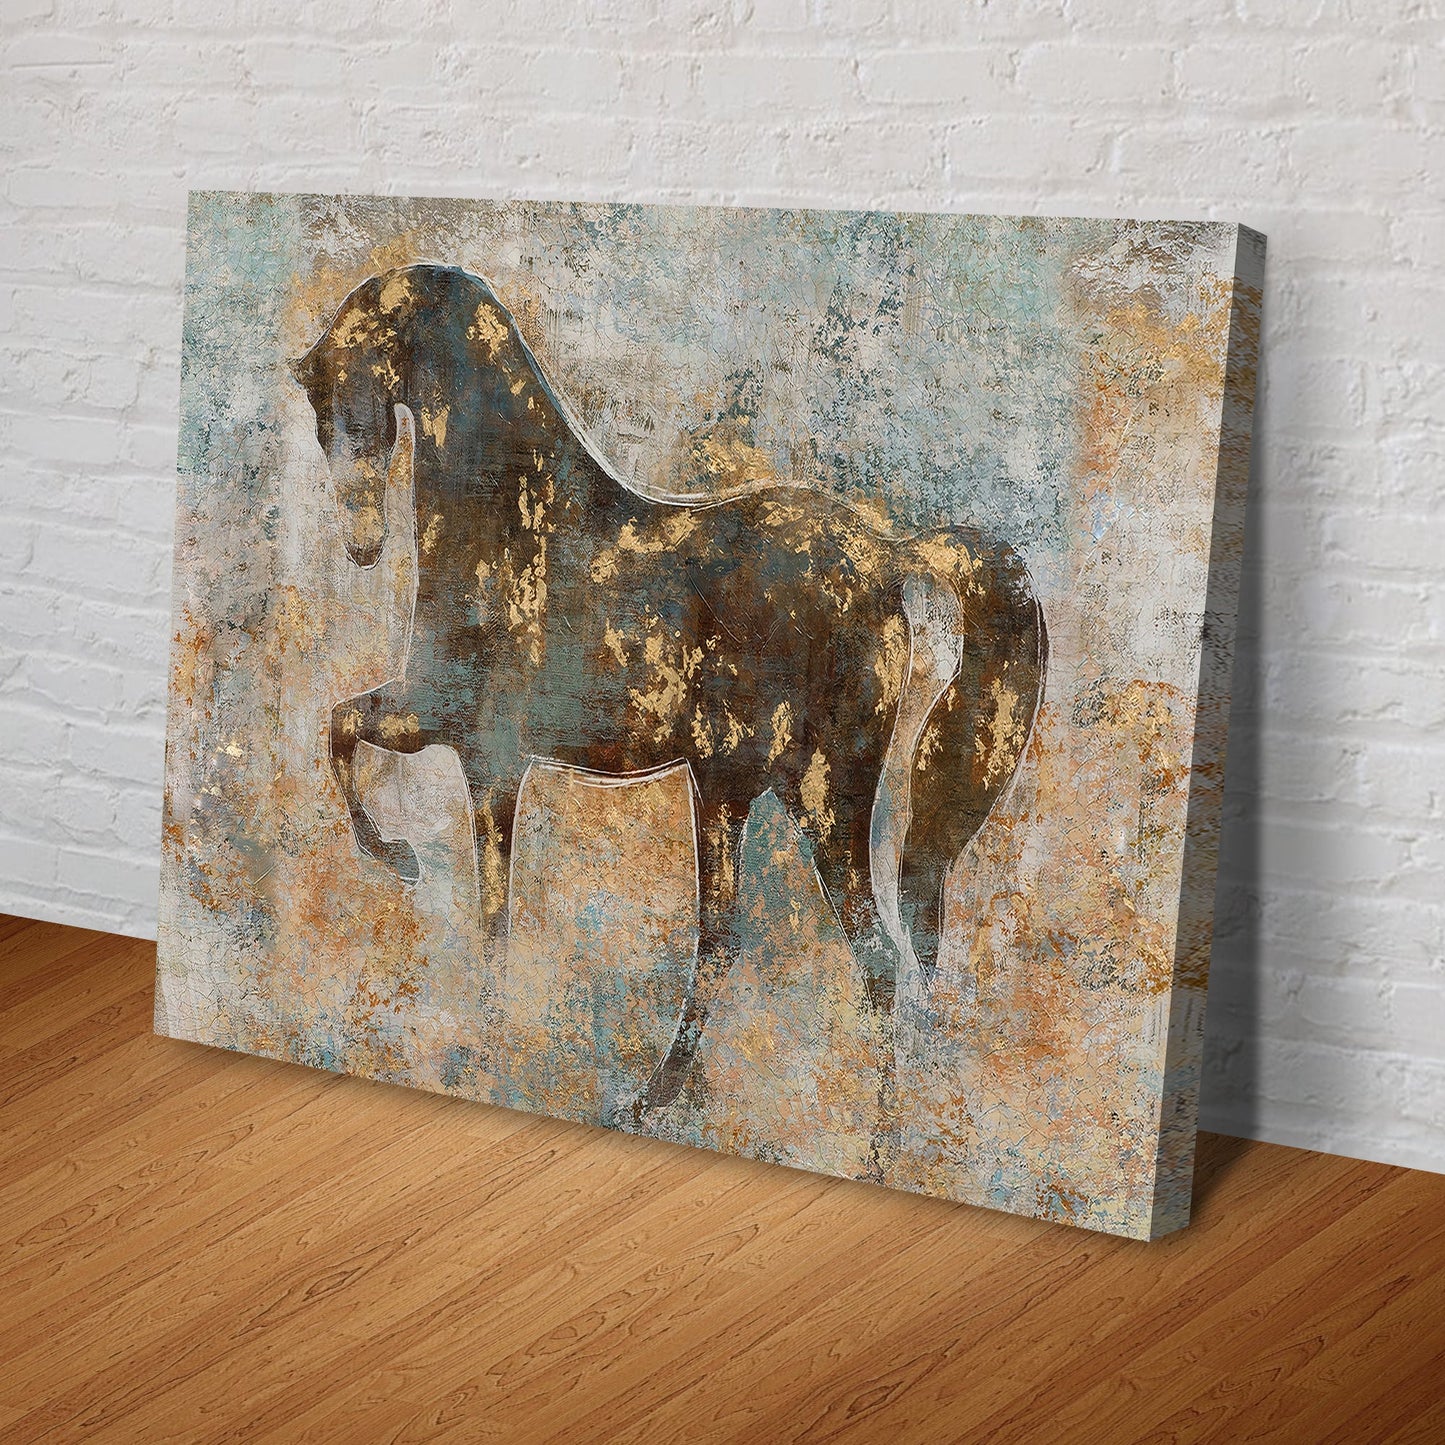 Canvas Wall Art  Artistic Equine Abstraction